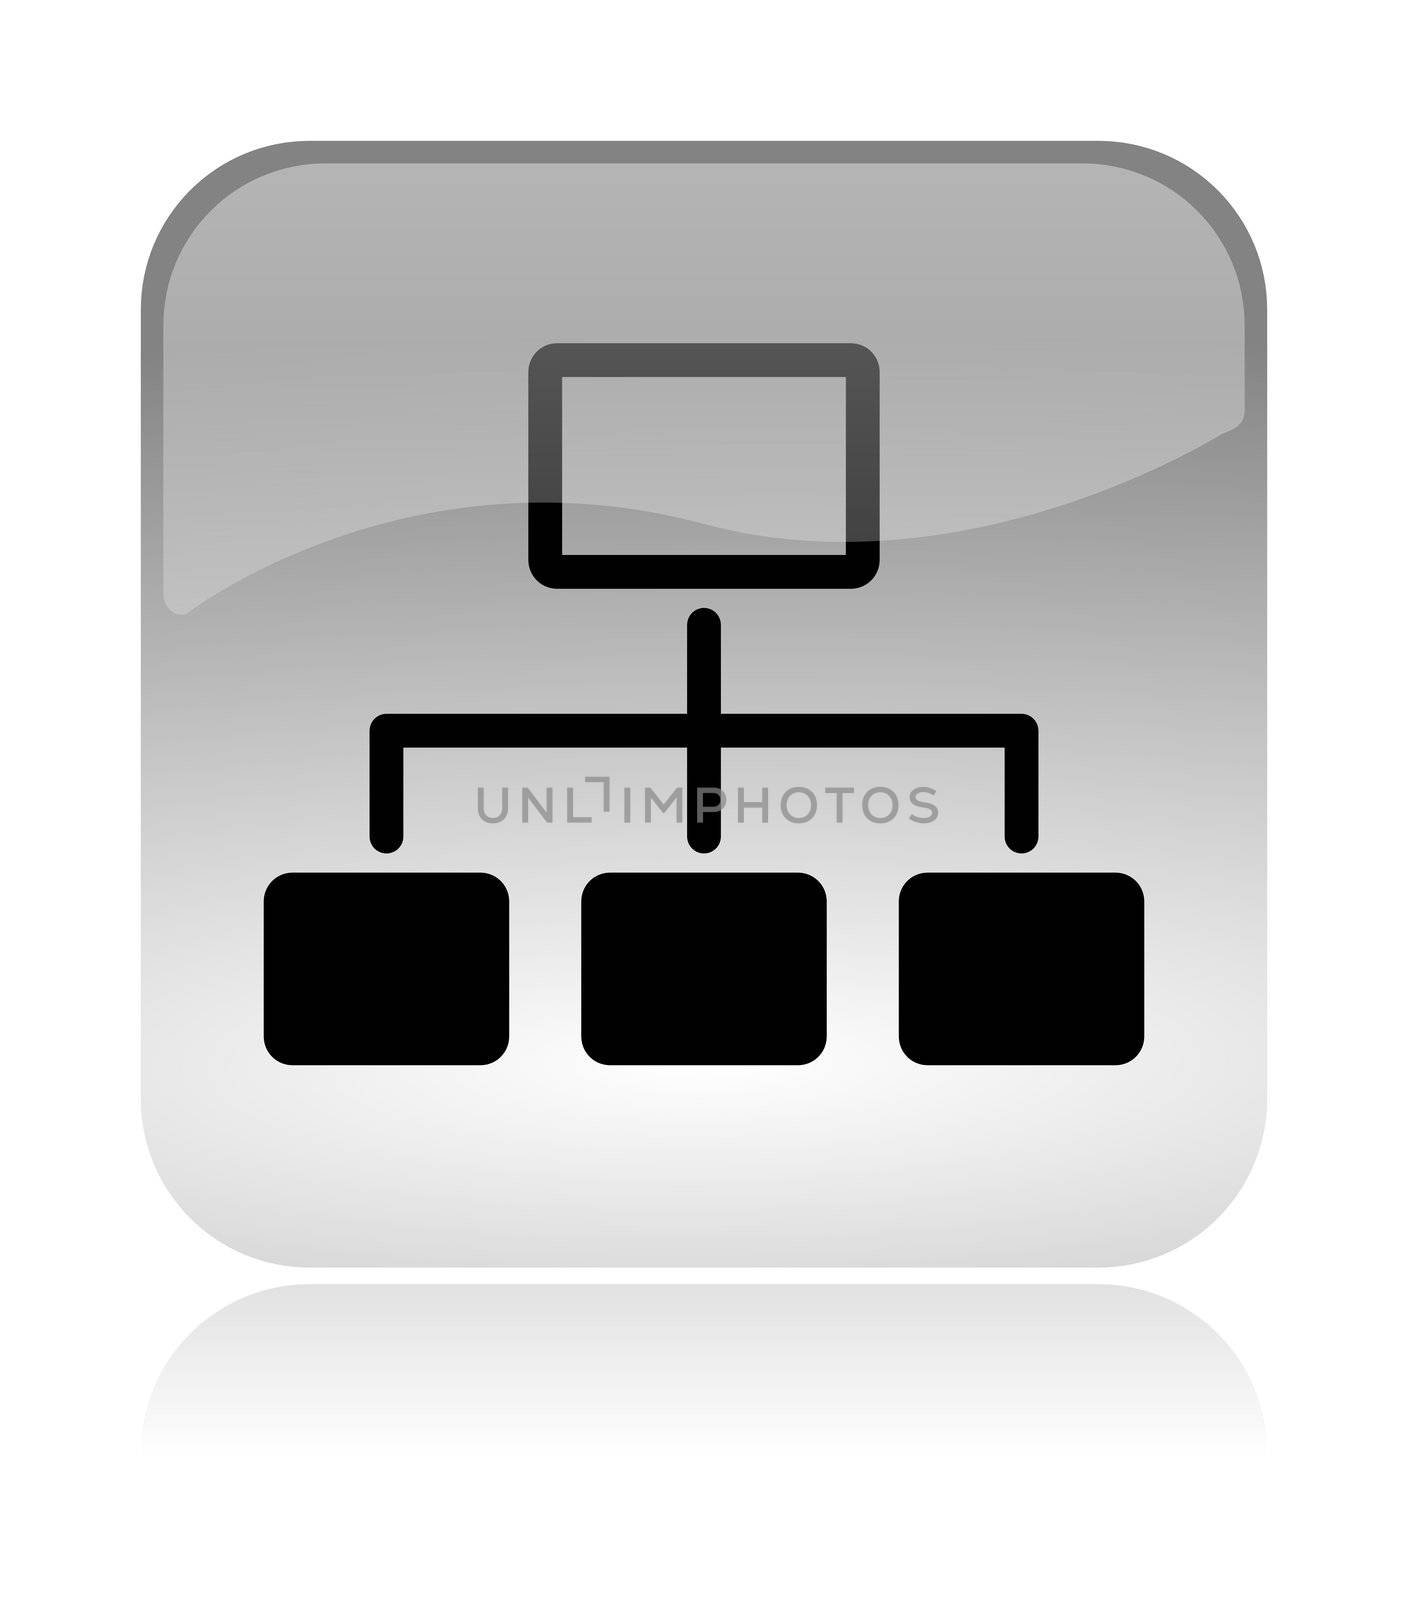 Network scheme white, transparent and glossy web interface icon with reflection